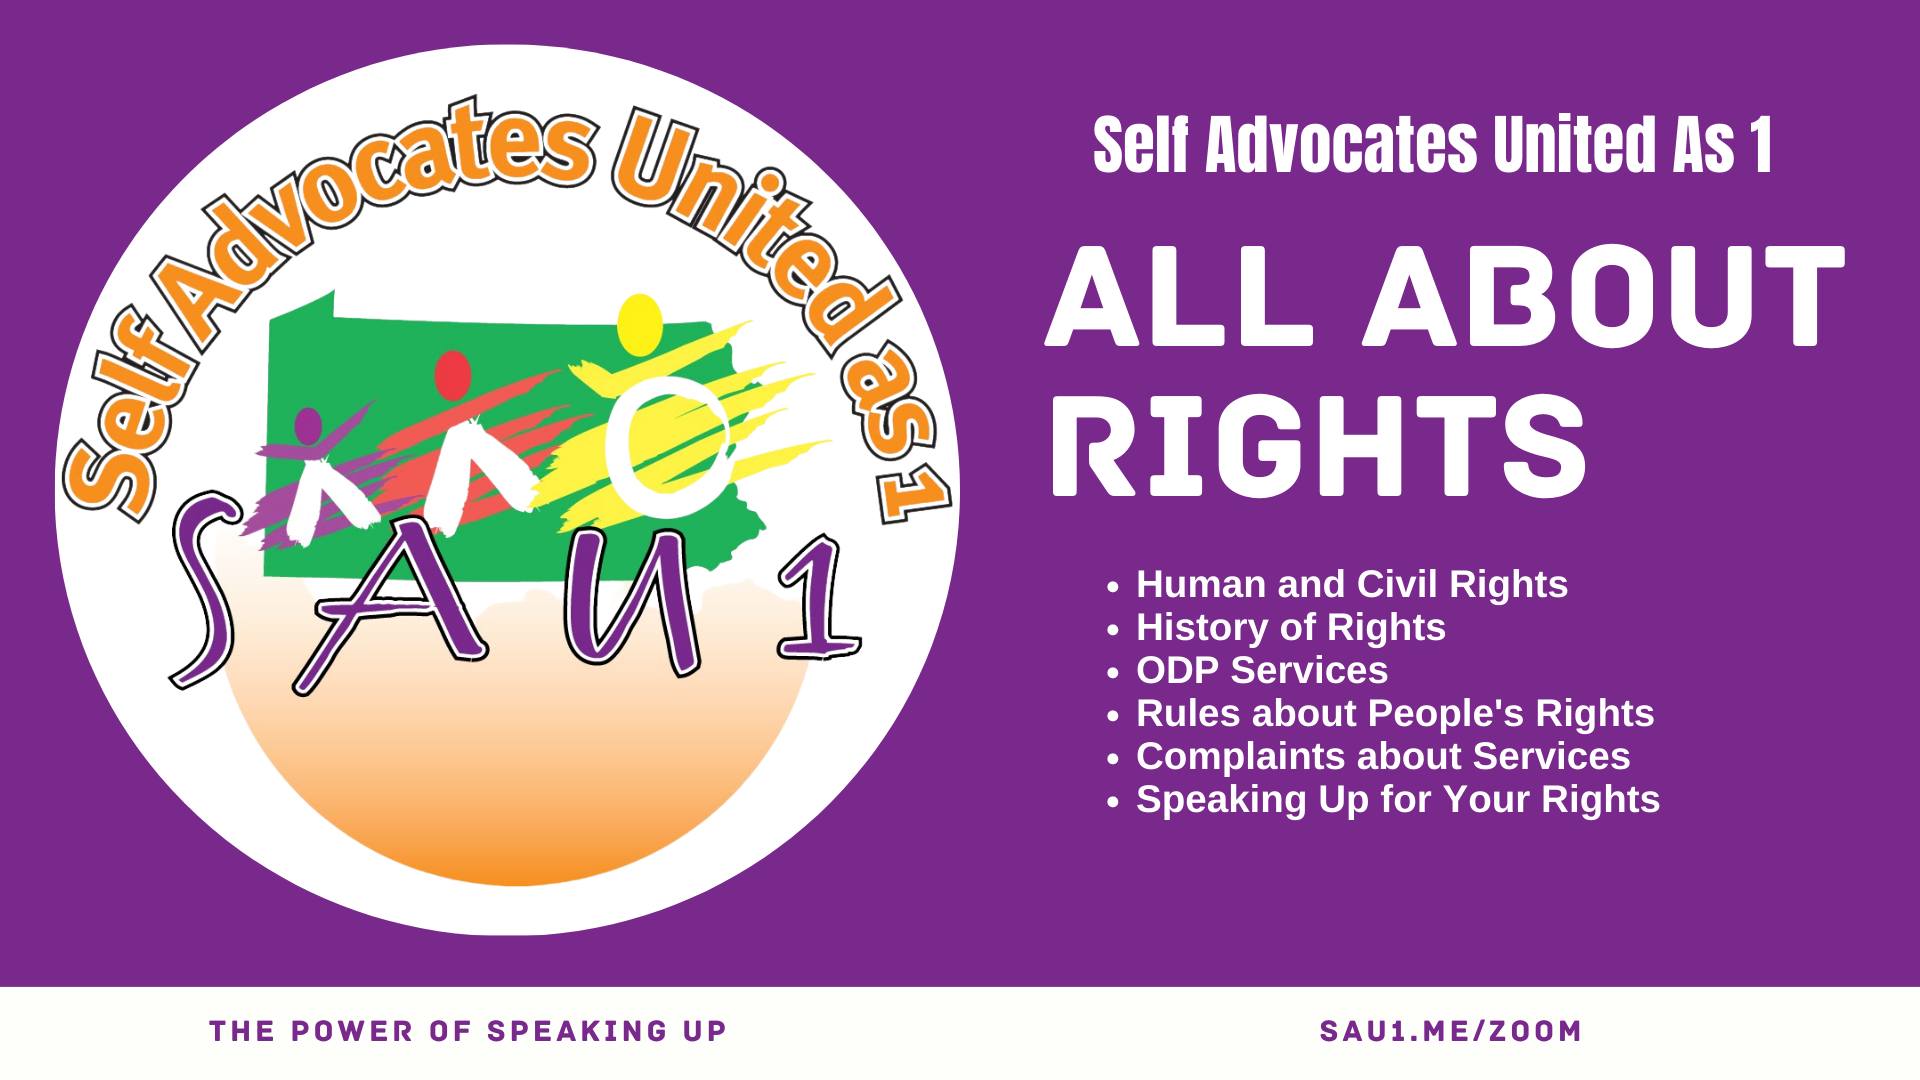 A purple banner with the Self Advocates United as 1 logo on the left and white text on the right. Text reads  Self Advocates United As 1 ALL ABOUT RIGHTS Human and Civil Rights History of Rights  ODP Services Rules about People's Rights Complaints about Services Speaking Up for Your Rights Purple text on a white background at the bottom reads THE POWER OF SPEAKING UP SAU1.ME/ZOOM.